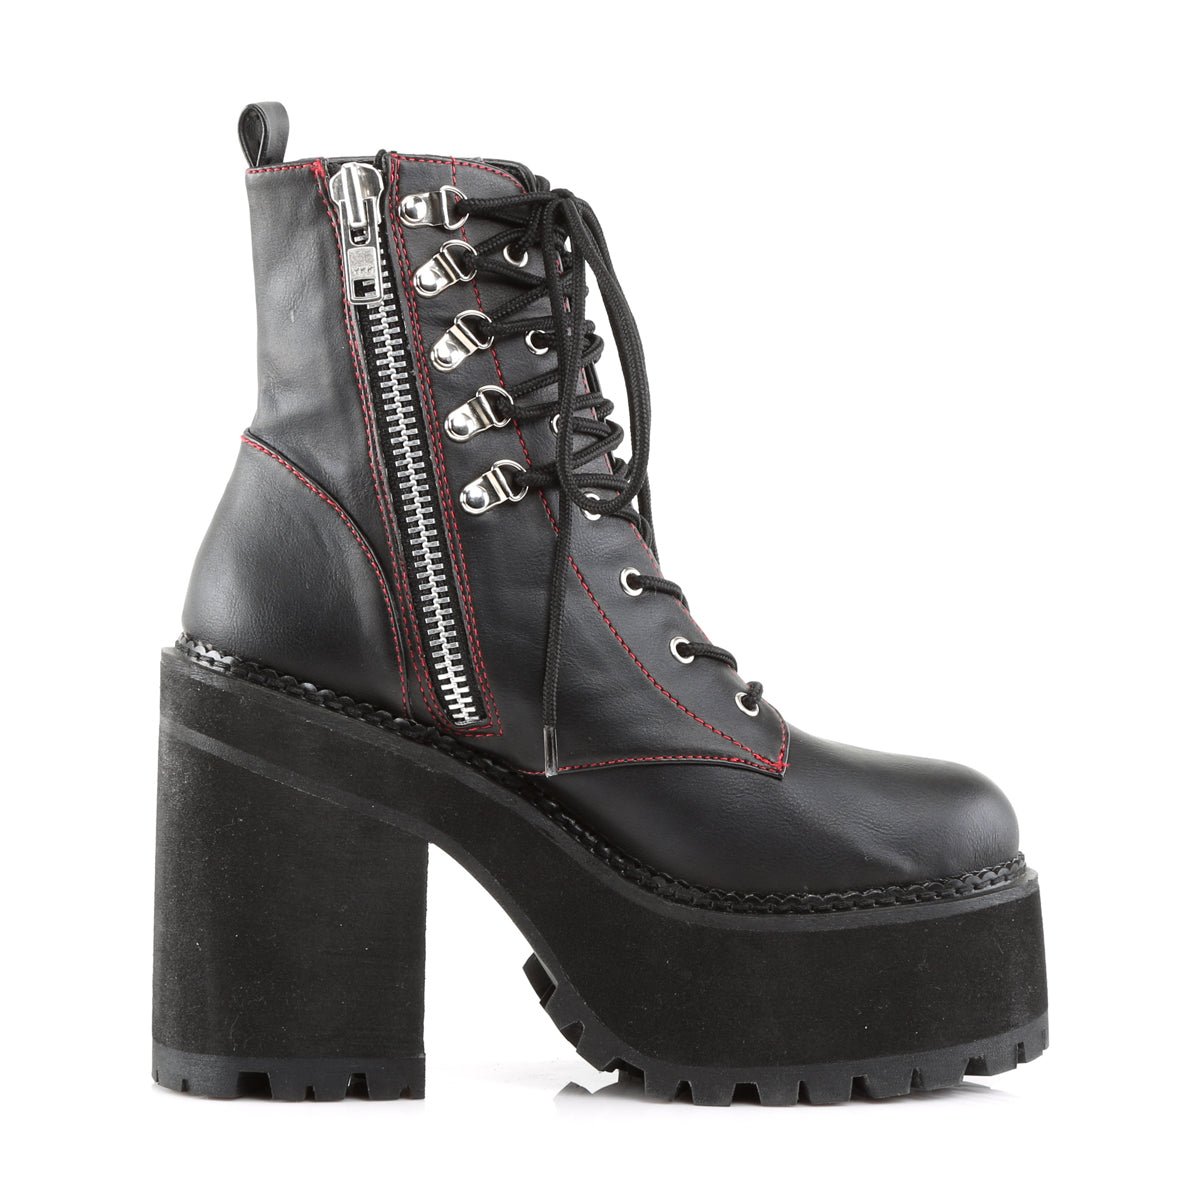 Too Fast | Demonia Assault 100 | Black Vegan Leather Women's Ankle Boots